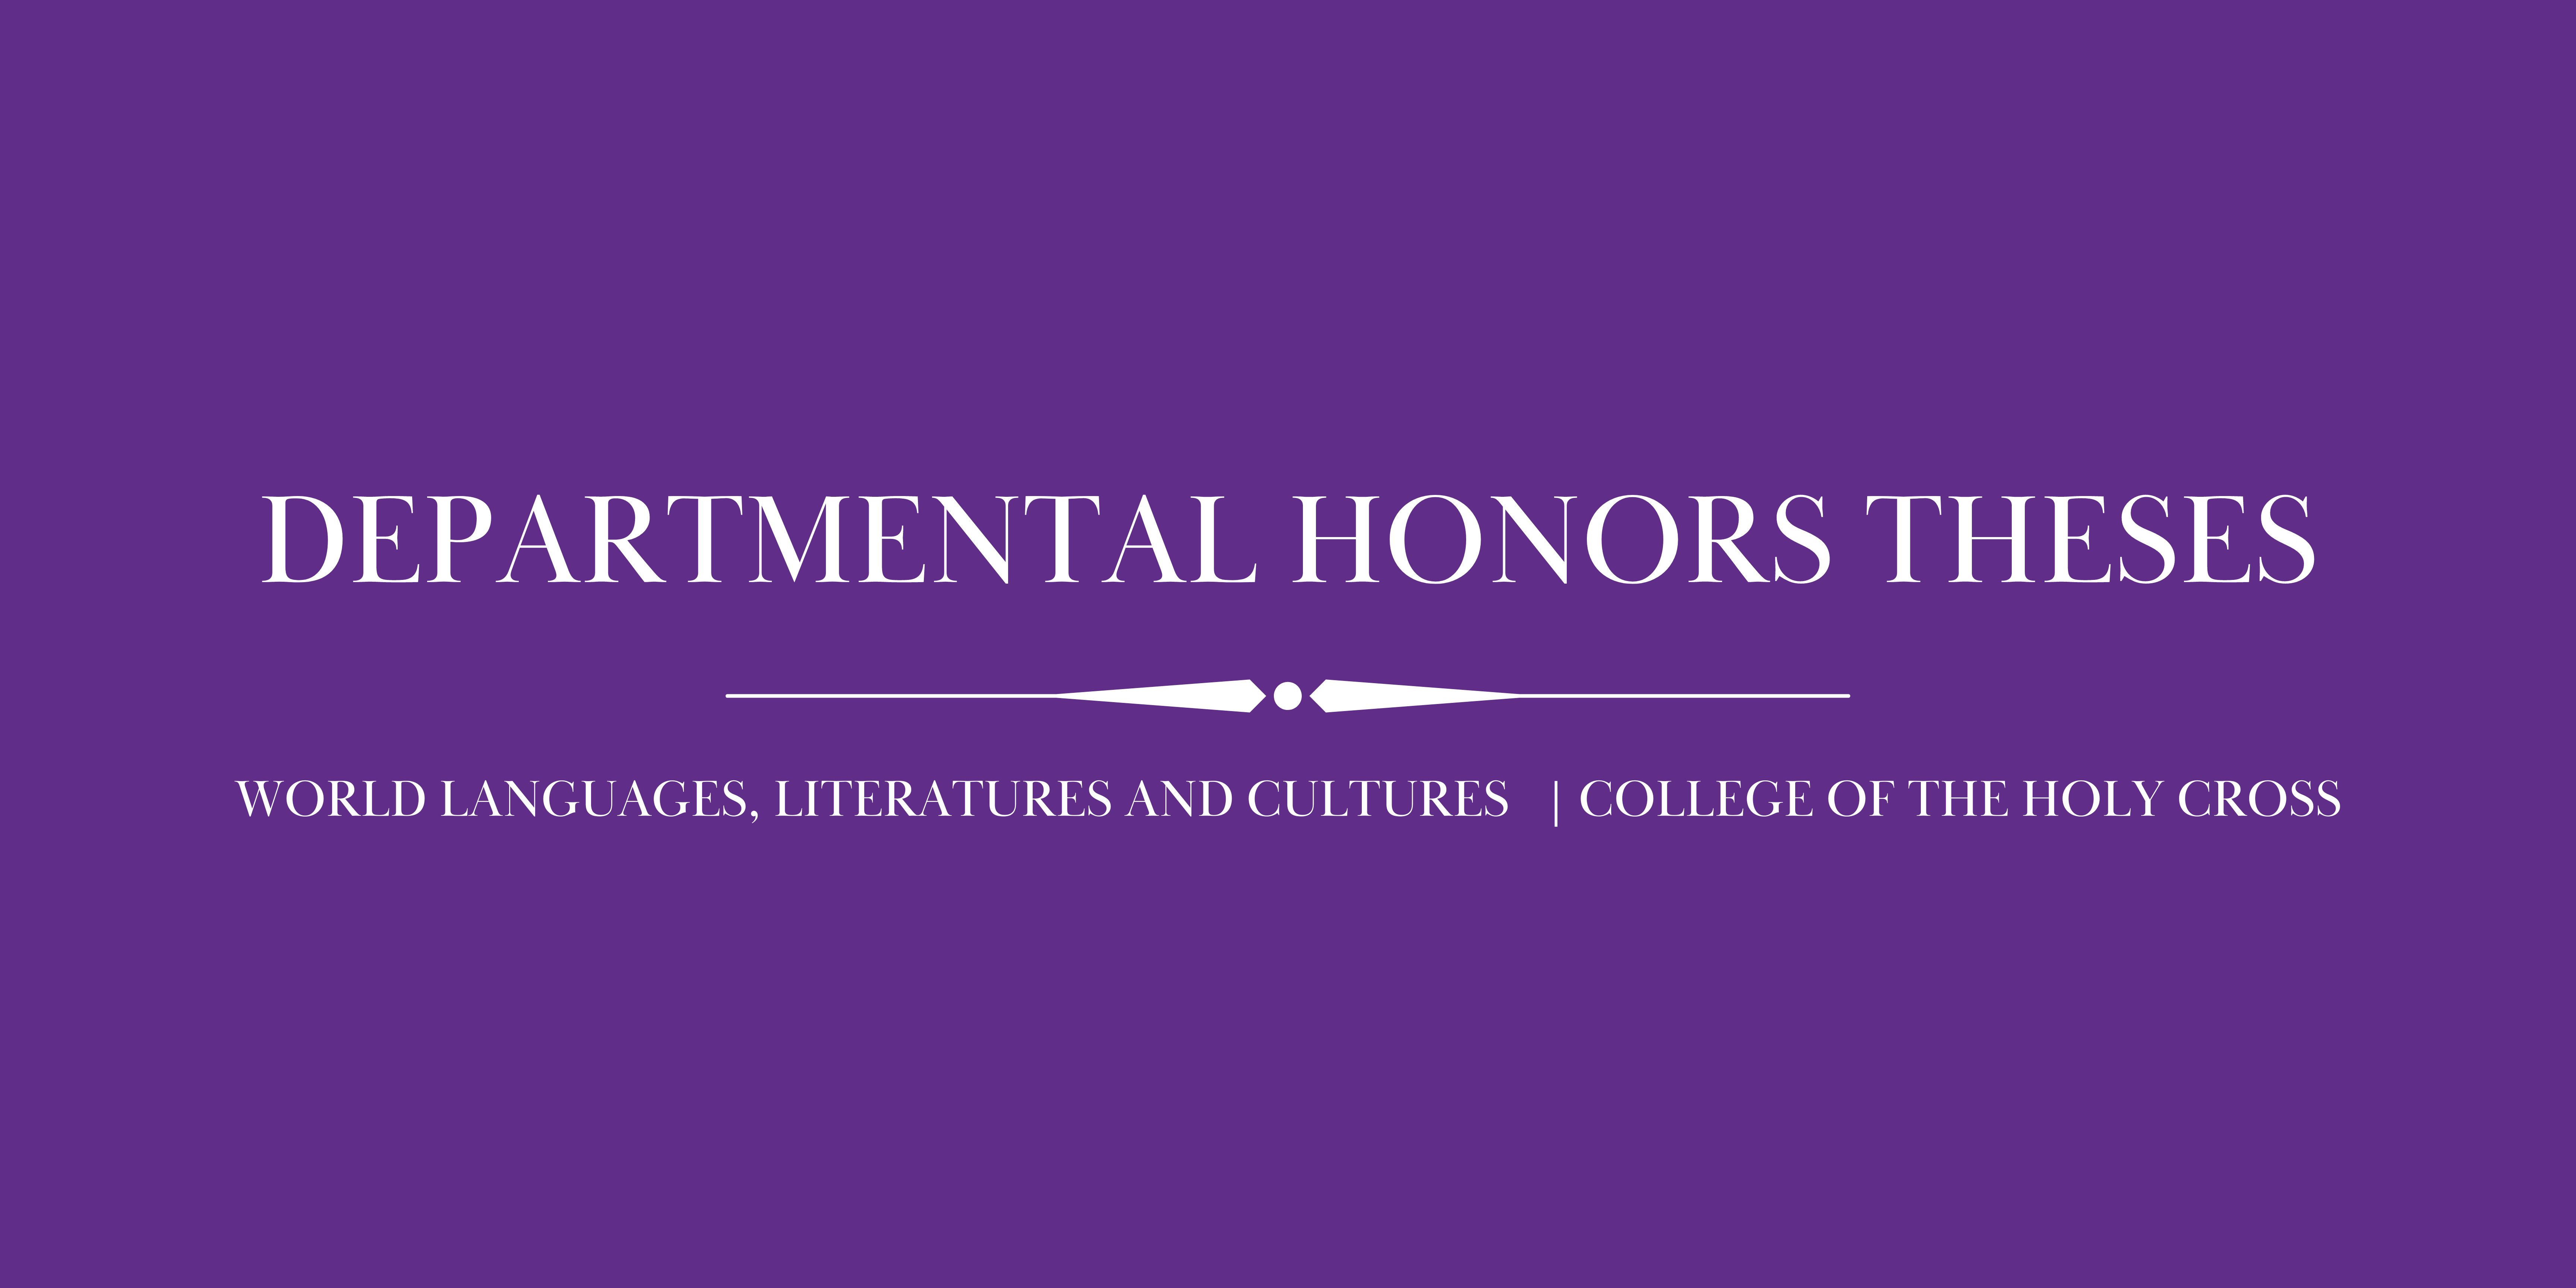 World Languages, Literatures and Cultures Honors Theses